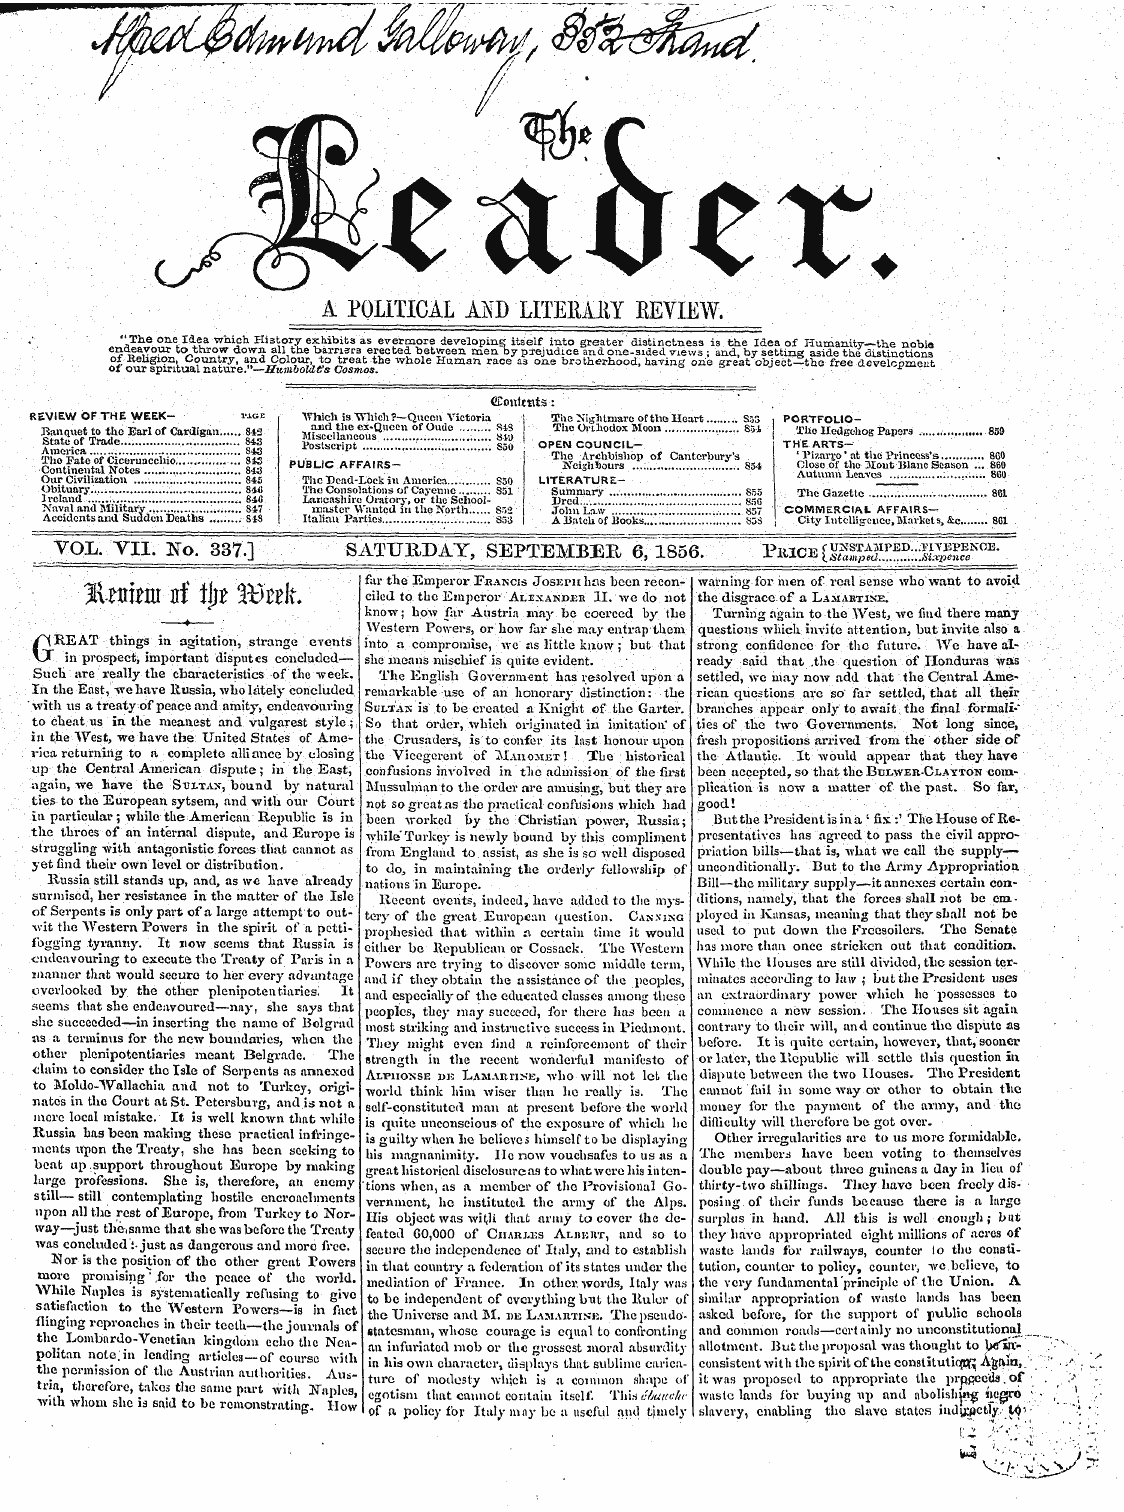 Leader (1850-1860): jS F Y, 2nd edition - . " . • " ¦ ¦ ¦ ¦ ¦ : ¦ ' ' - • -¦¦ • ¦ ...